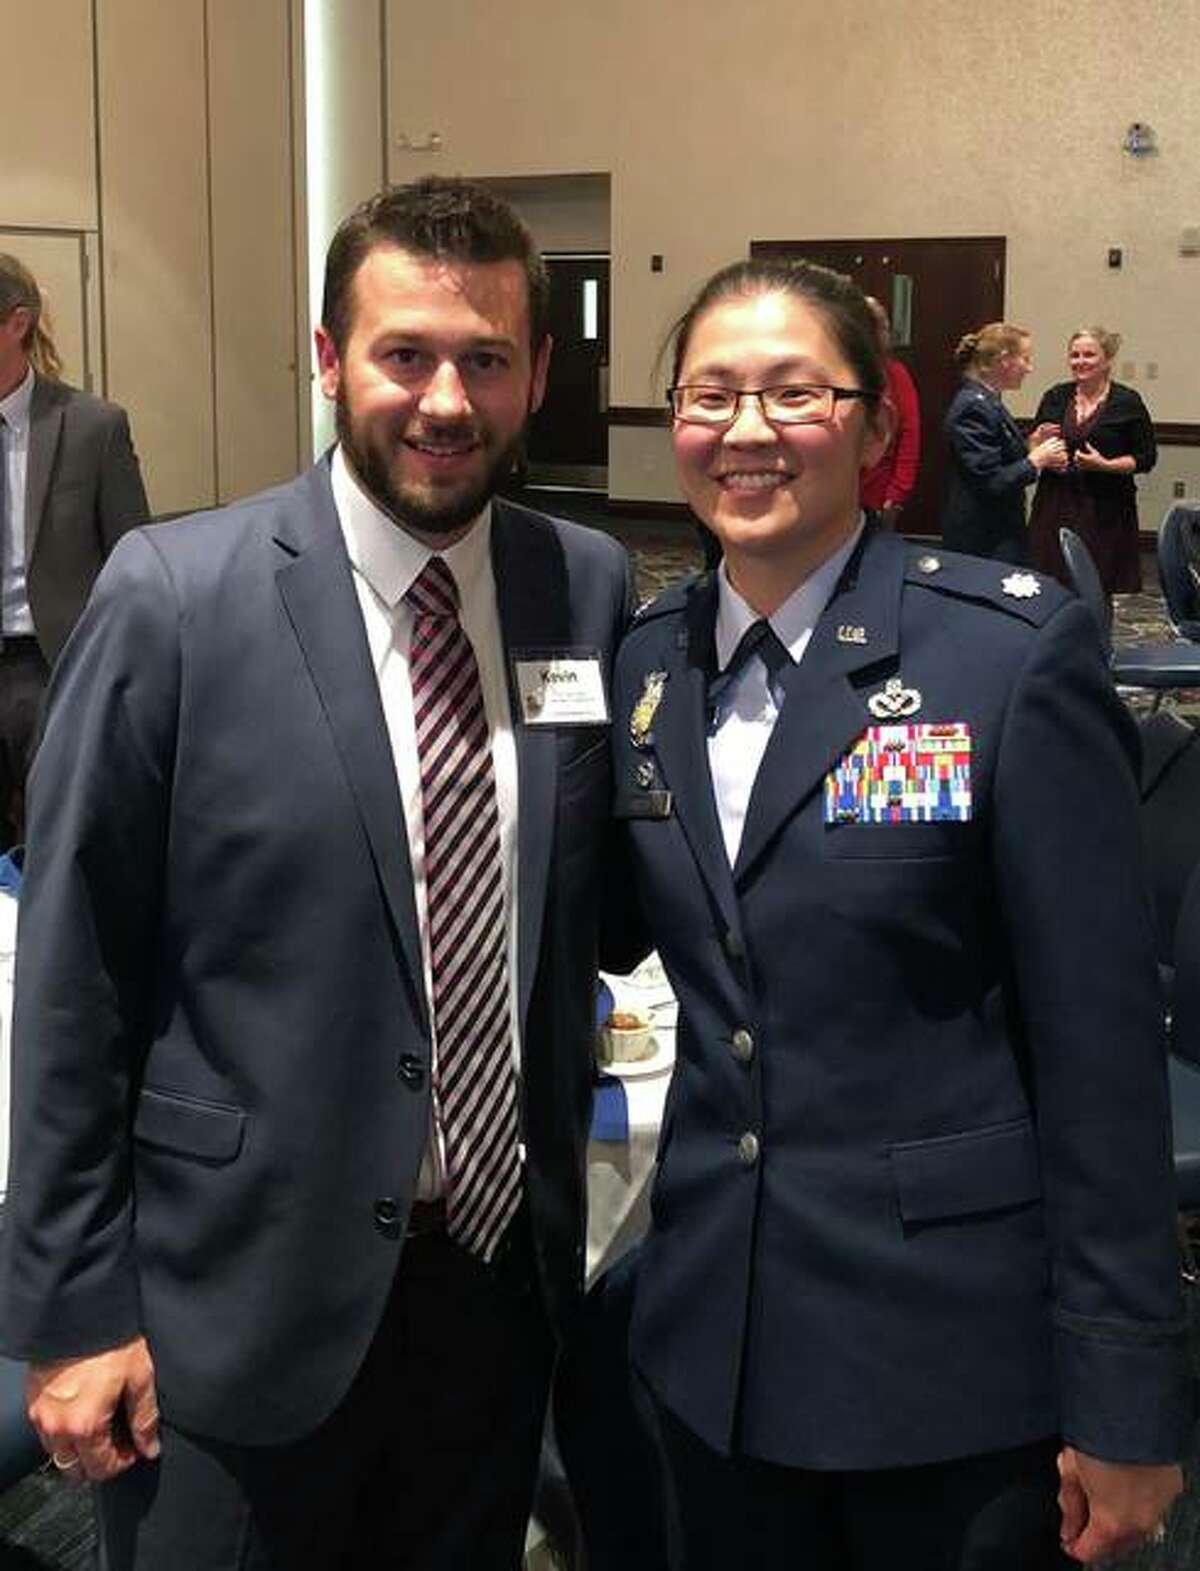 Lt. Col. Nichole Scott (right) stands with TheBank of Edwardsville’s Kevin Welch. The two are to be paired up in the Honorary Commanders Program at Scott AFB.